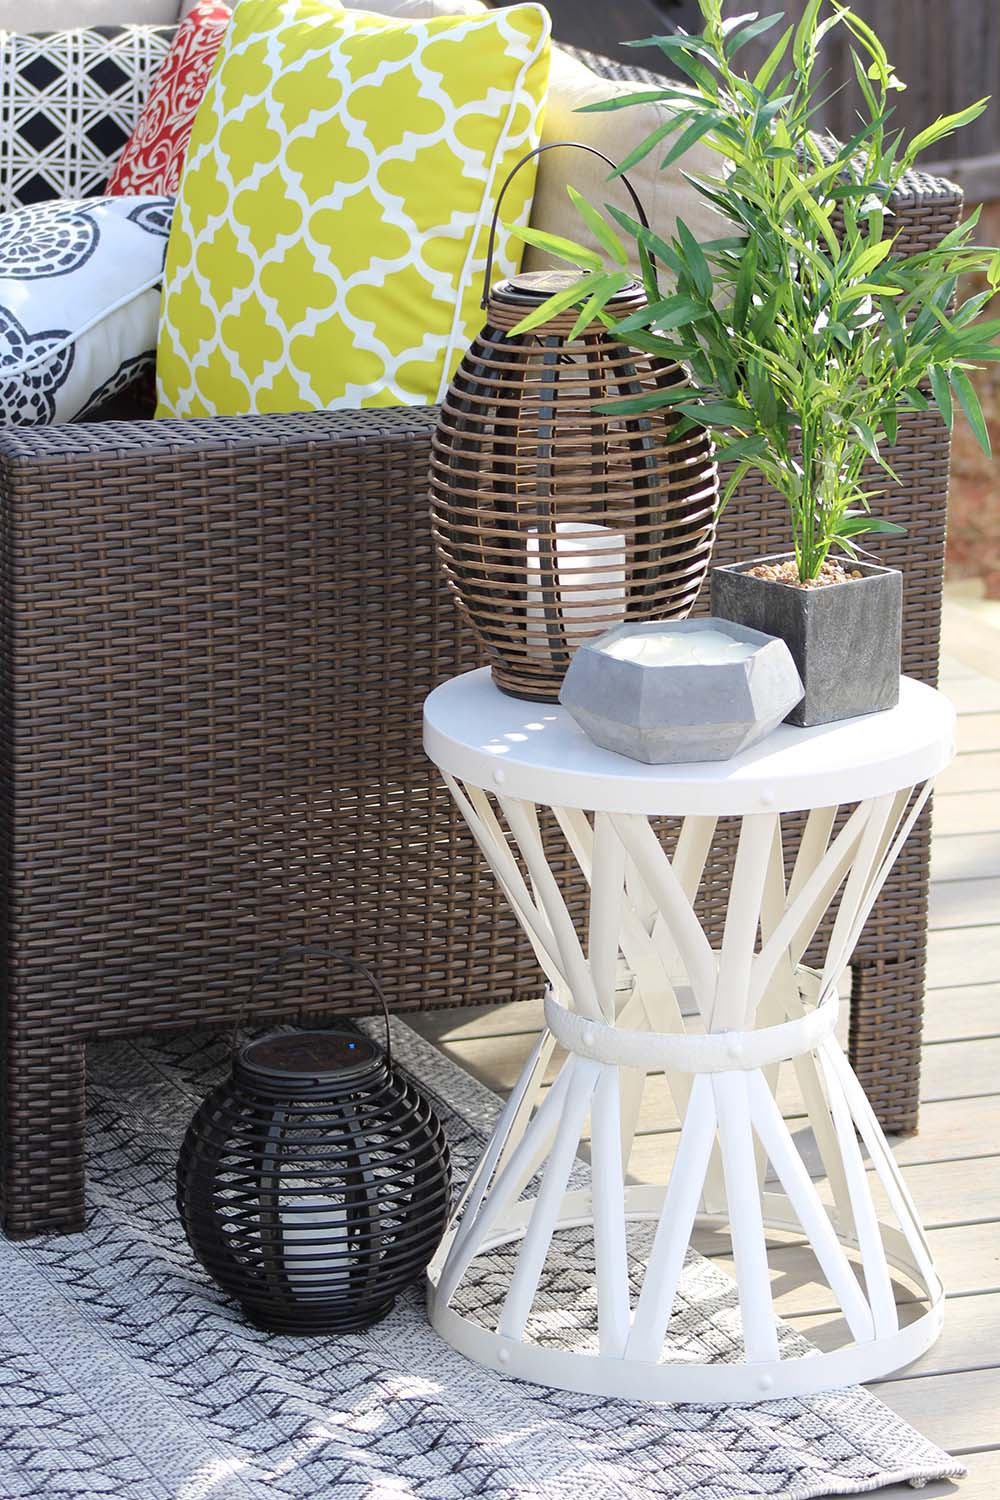 Patio furniture and outdoor decor on floating deck